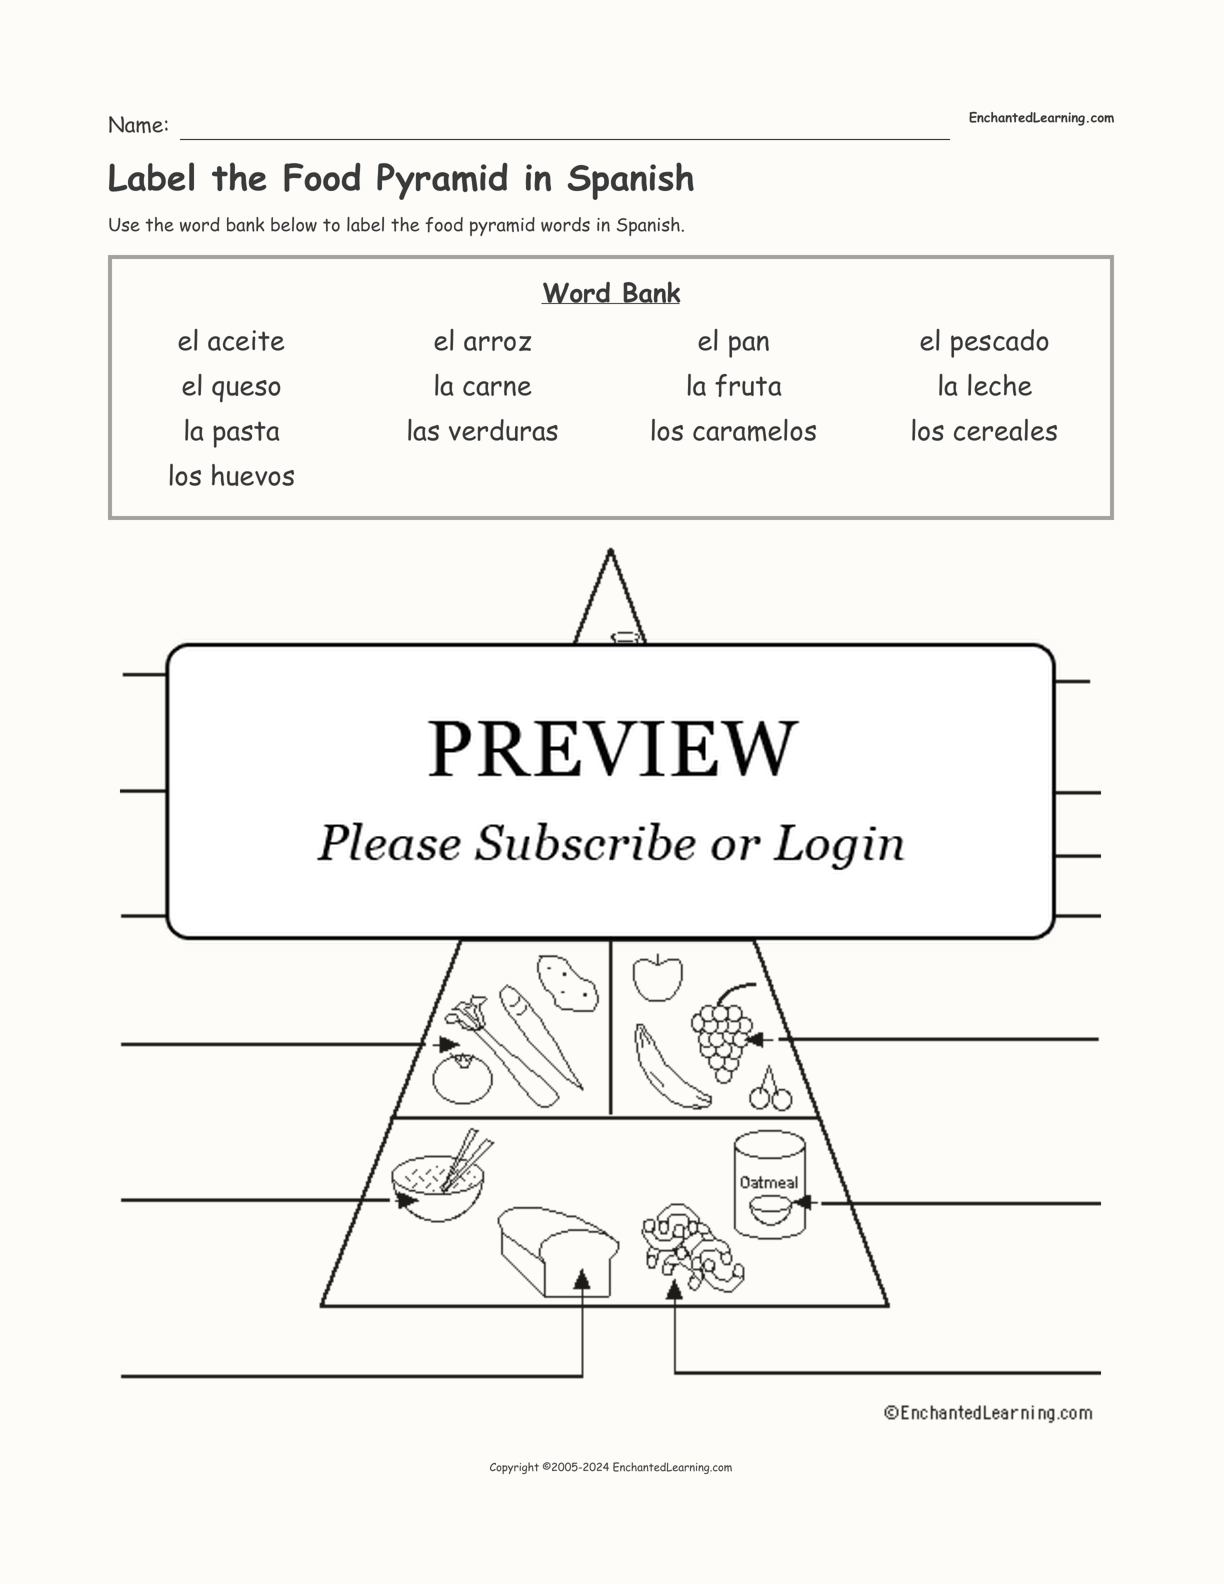 Label the Food Pyramid in Spanish interactive worksheet page 1